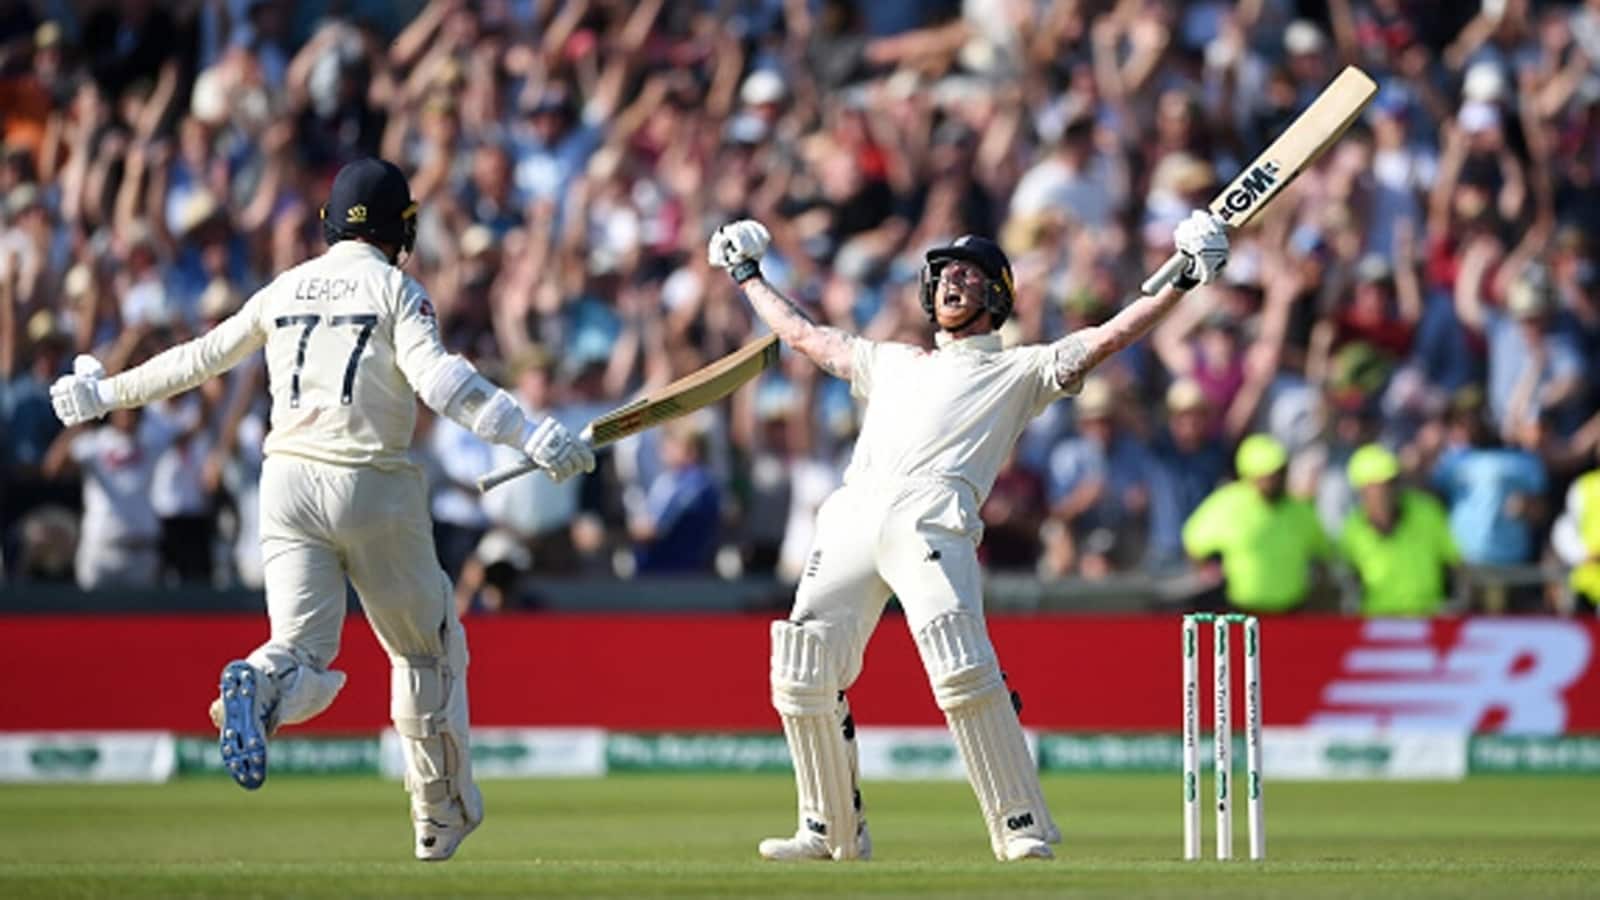 Road to The Ashes: Relive Ben Stokes' wonder knock at Headingley in 2019 | Cricket - Hindustan Times